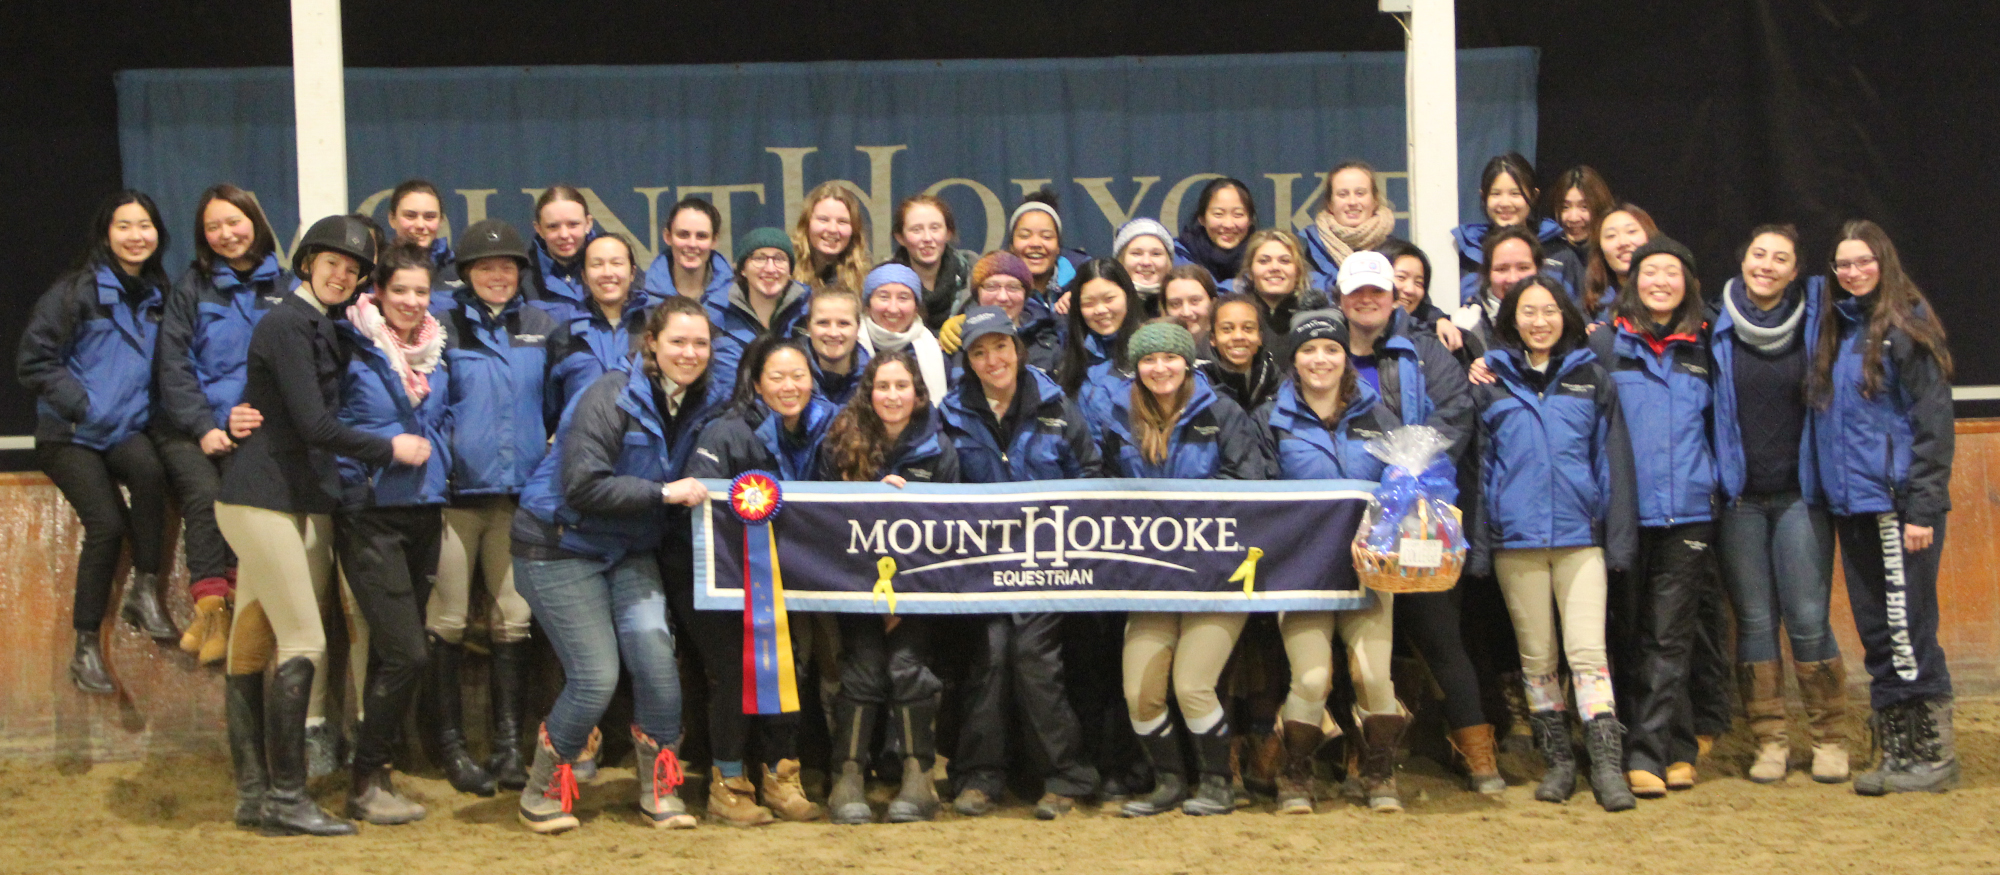 Photo of the MHC Riding team following their win on Mar. 2, 2019 at their home show.